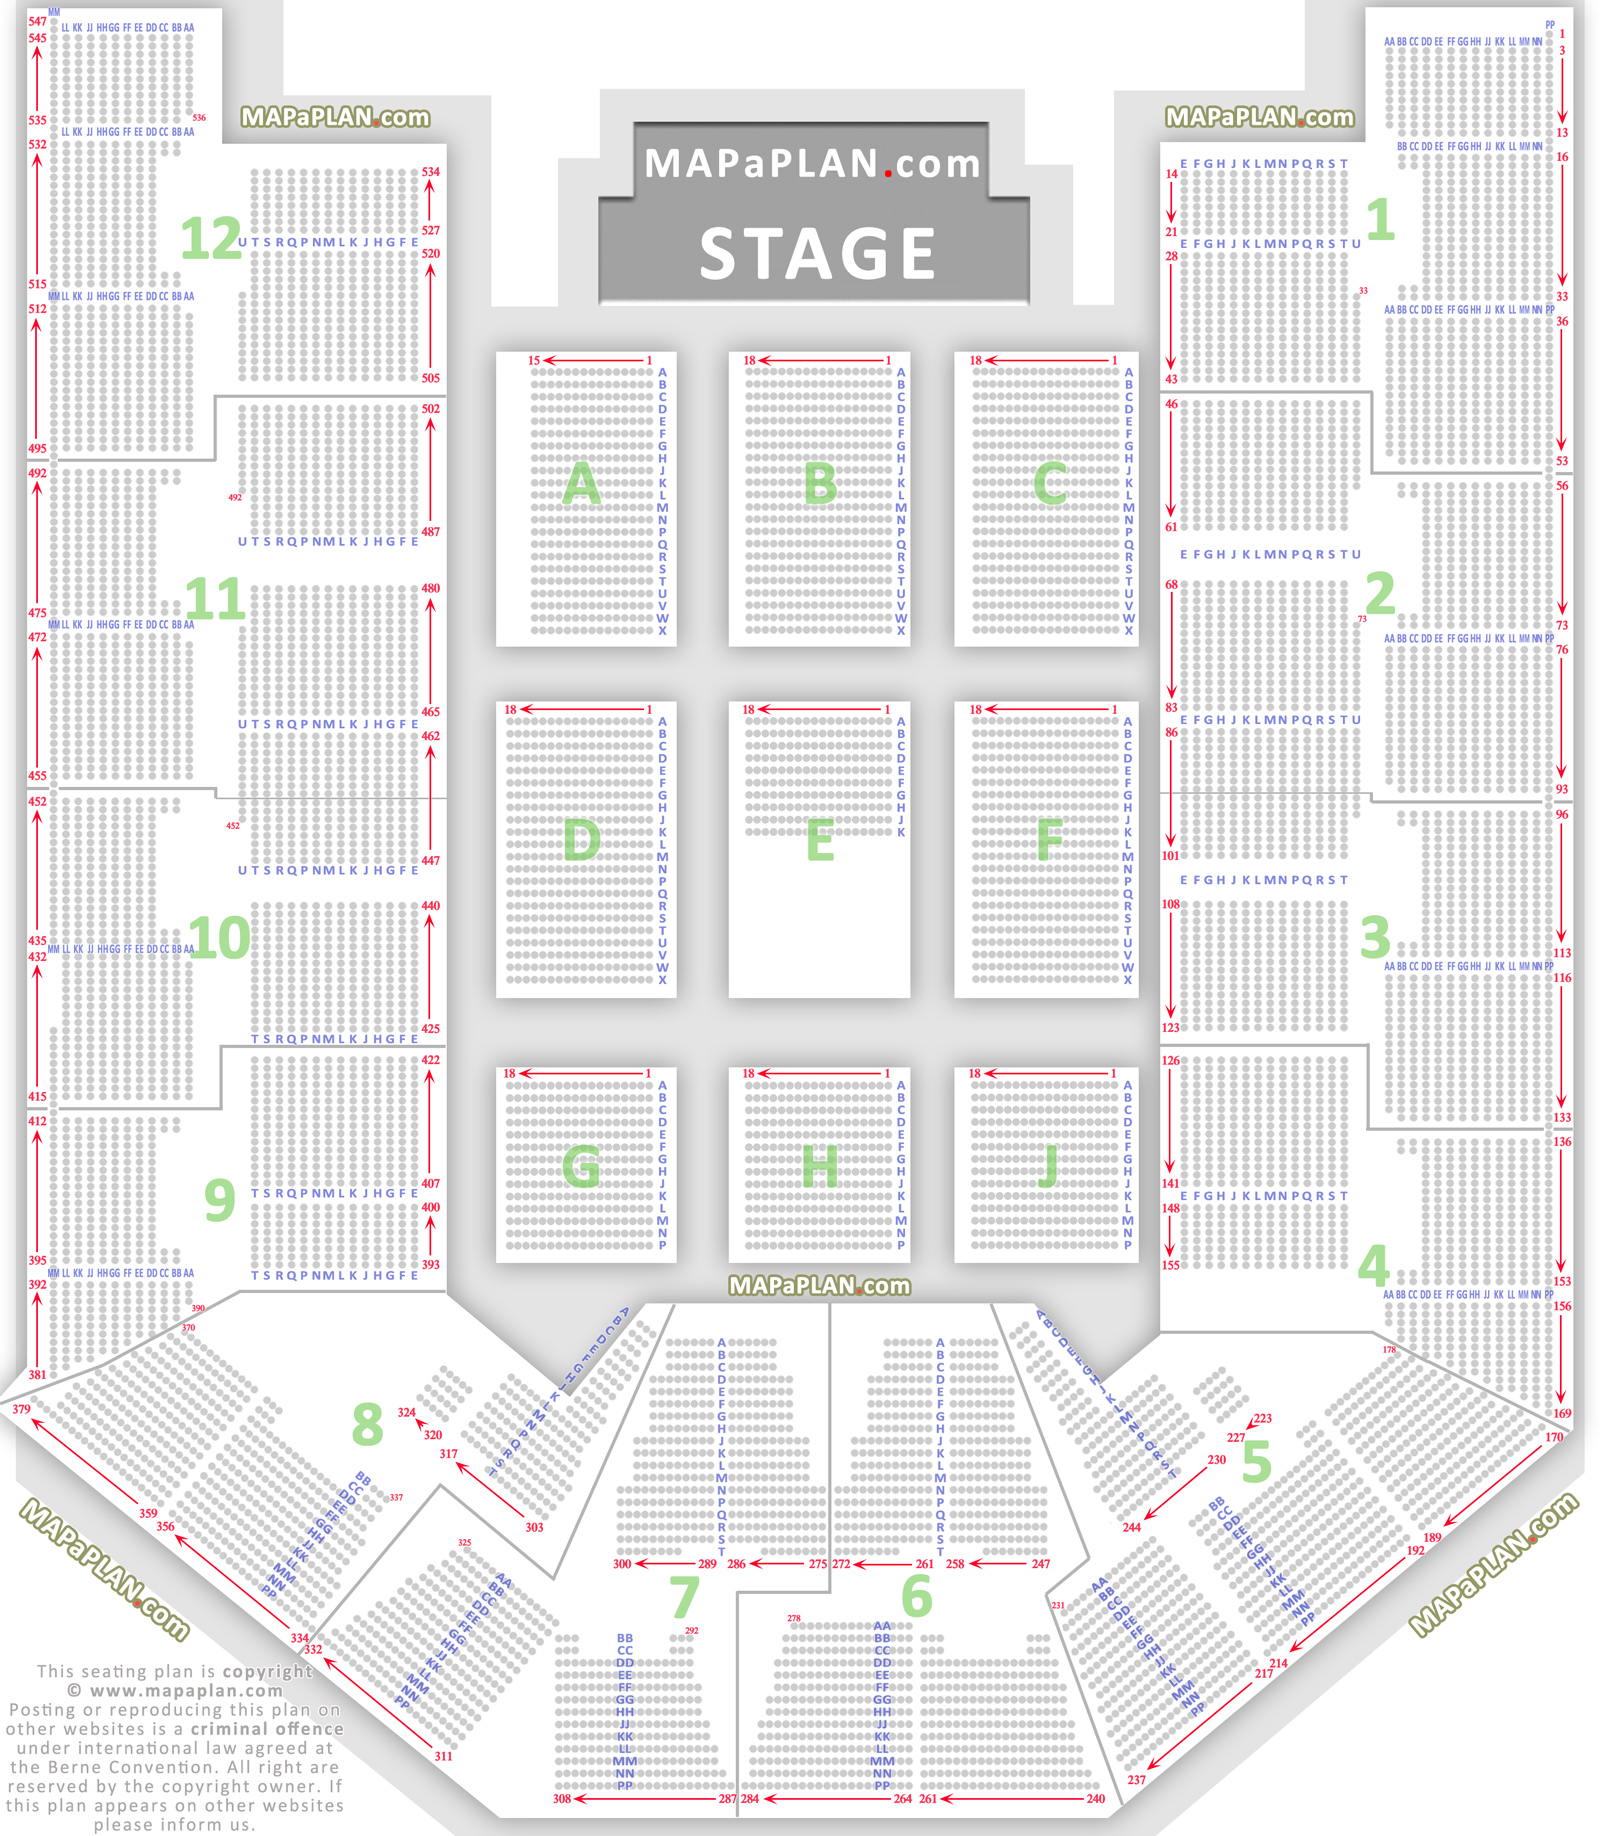 Detailed seat row numbers concert chart floor lower upper tier level block layout Birmingham Barclaycard Arena NIA National Indoor Arena seating plan